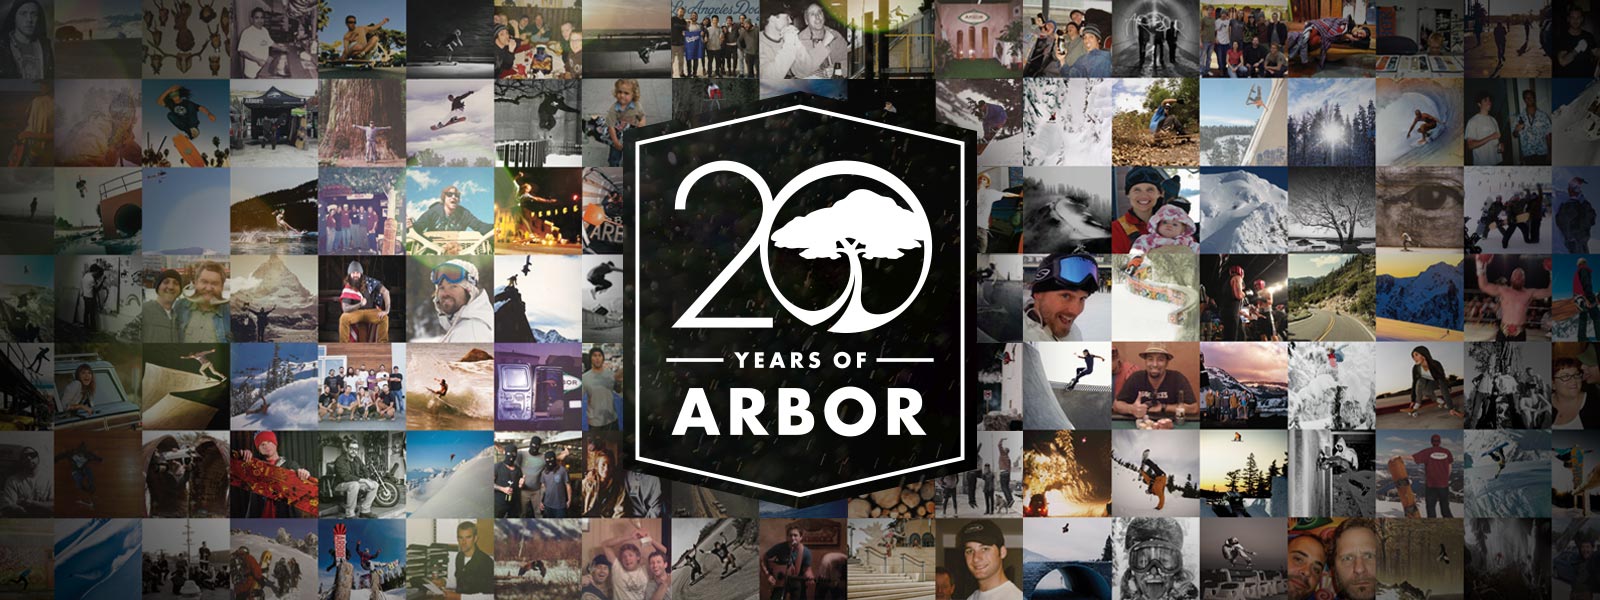 Arbor-Collective_20-Year